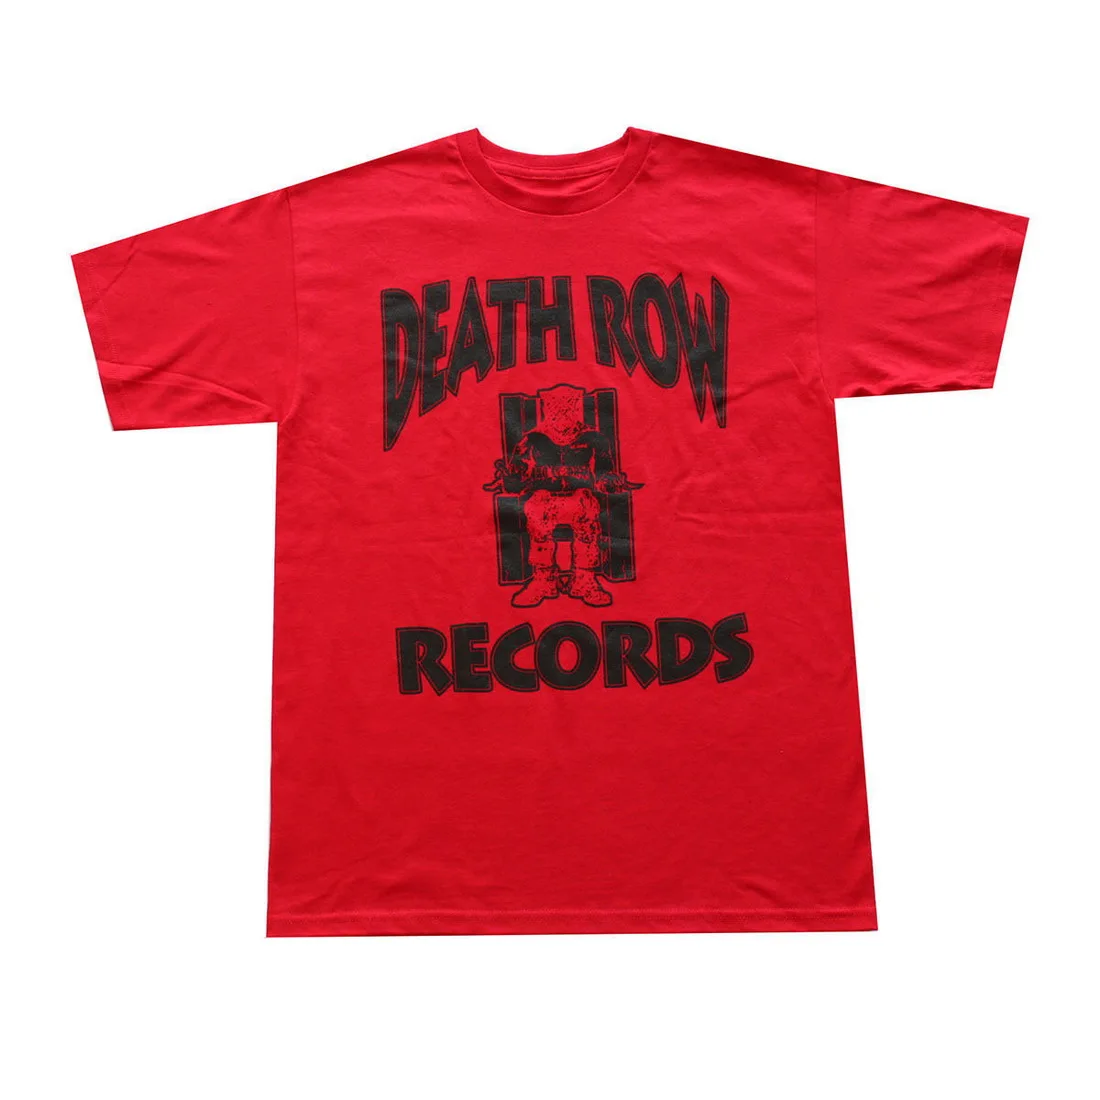 death row records shirt red